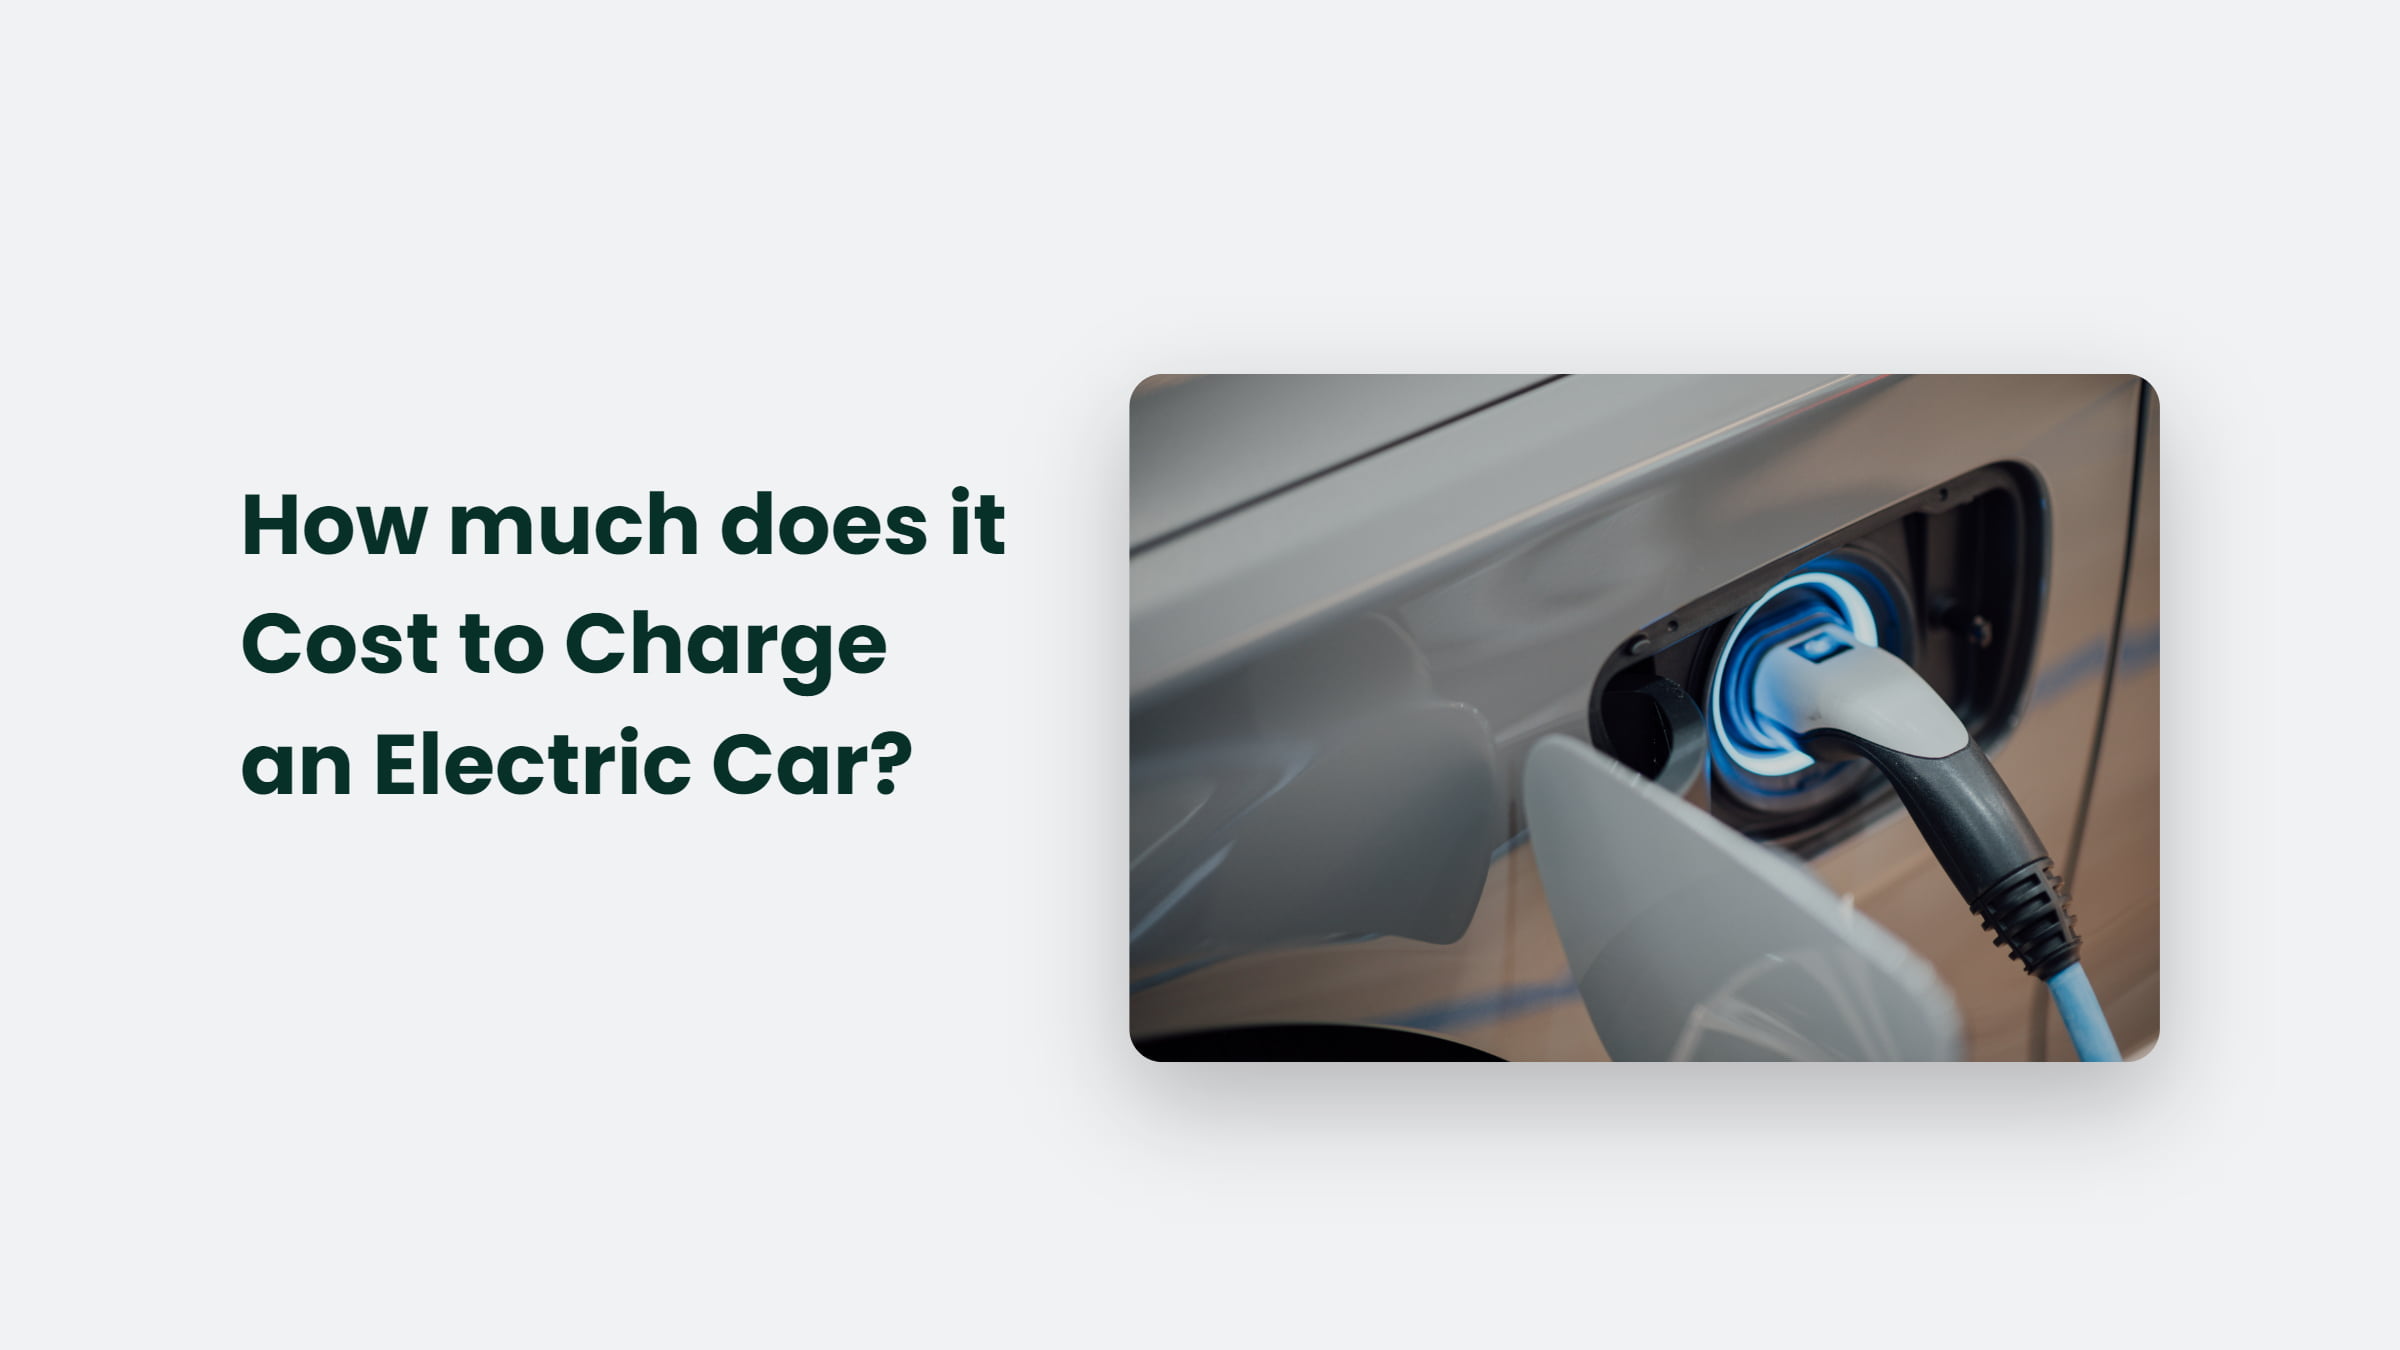 How Much Does It Cost To Charge An Electric Car?